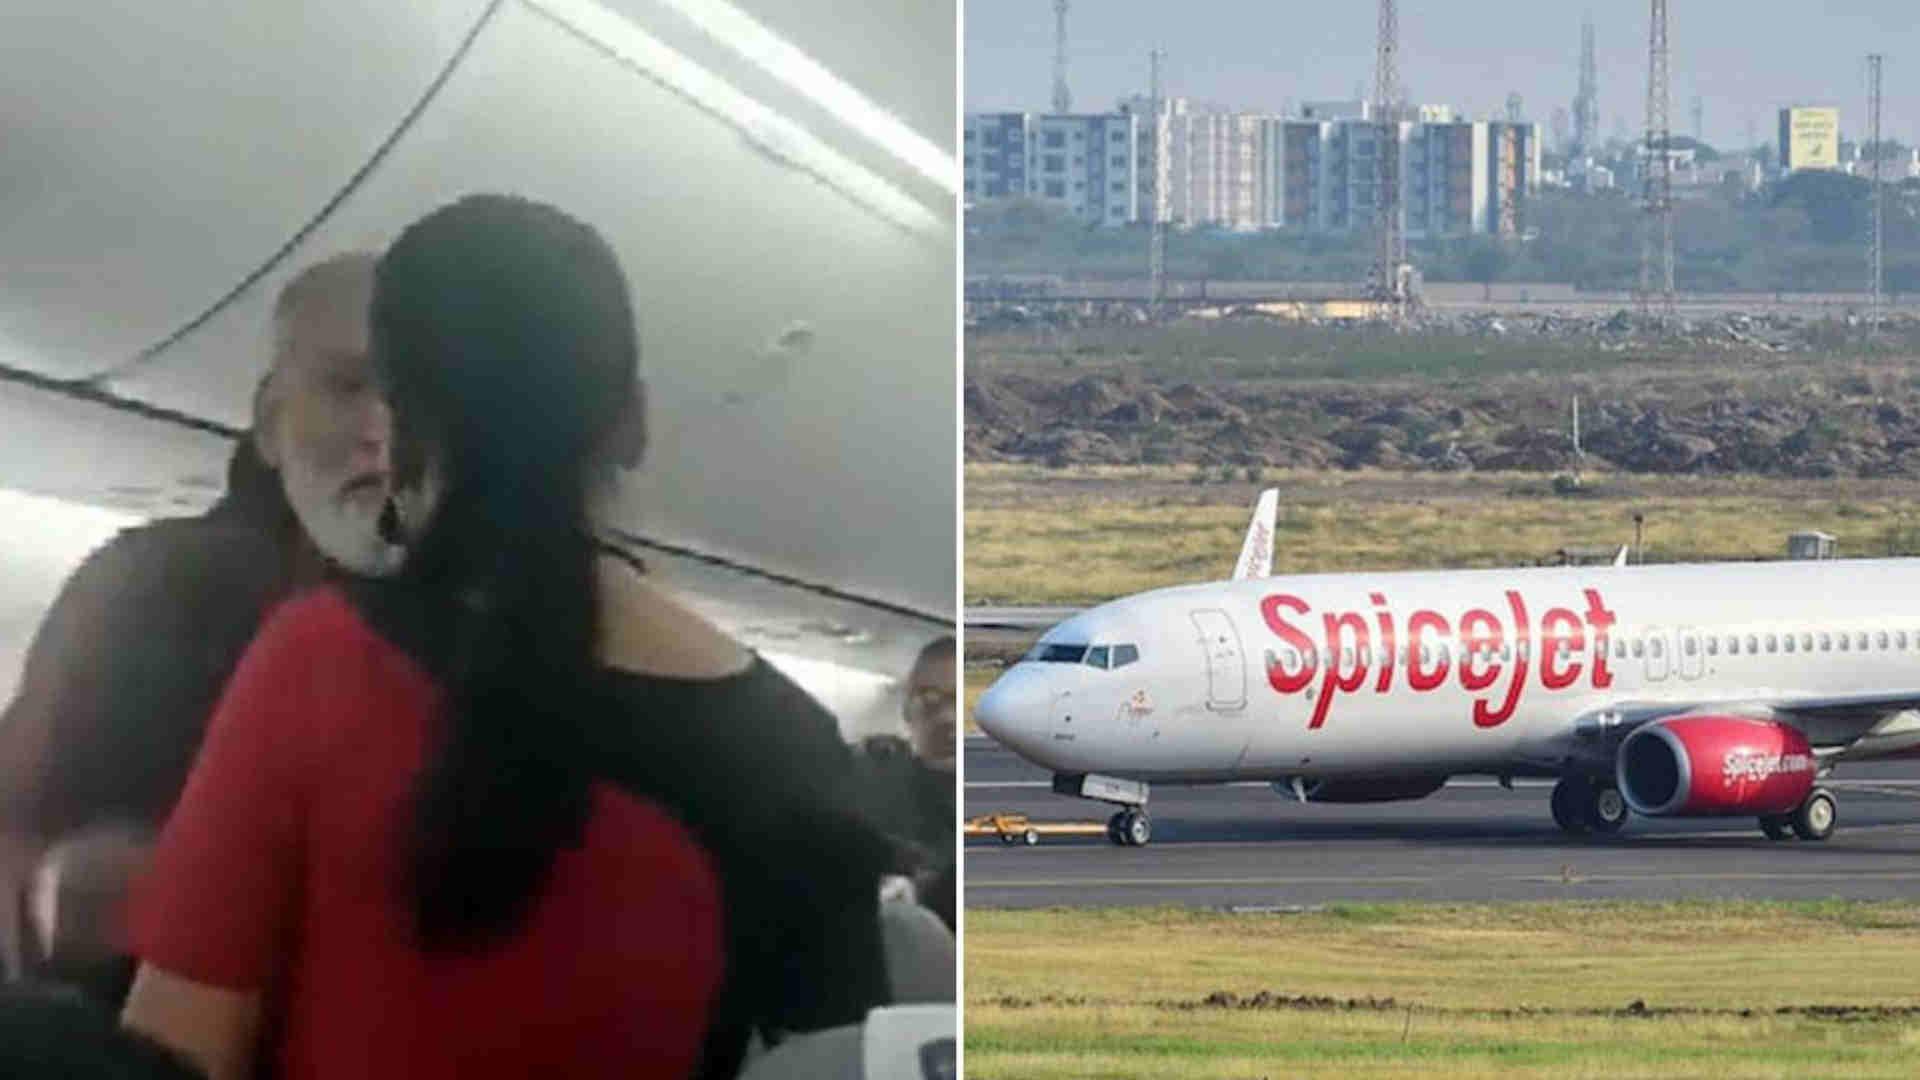 female-crew-member-molested-in-flight-commotion-in-spice-jet-the-passenger-was-disembarked-from-the-plane-82083